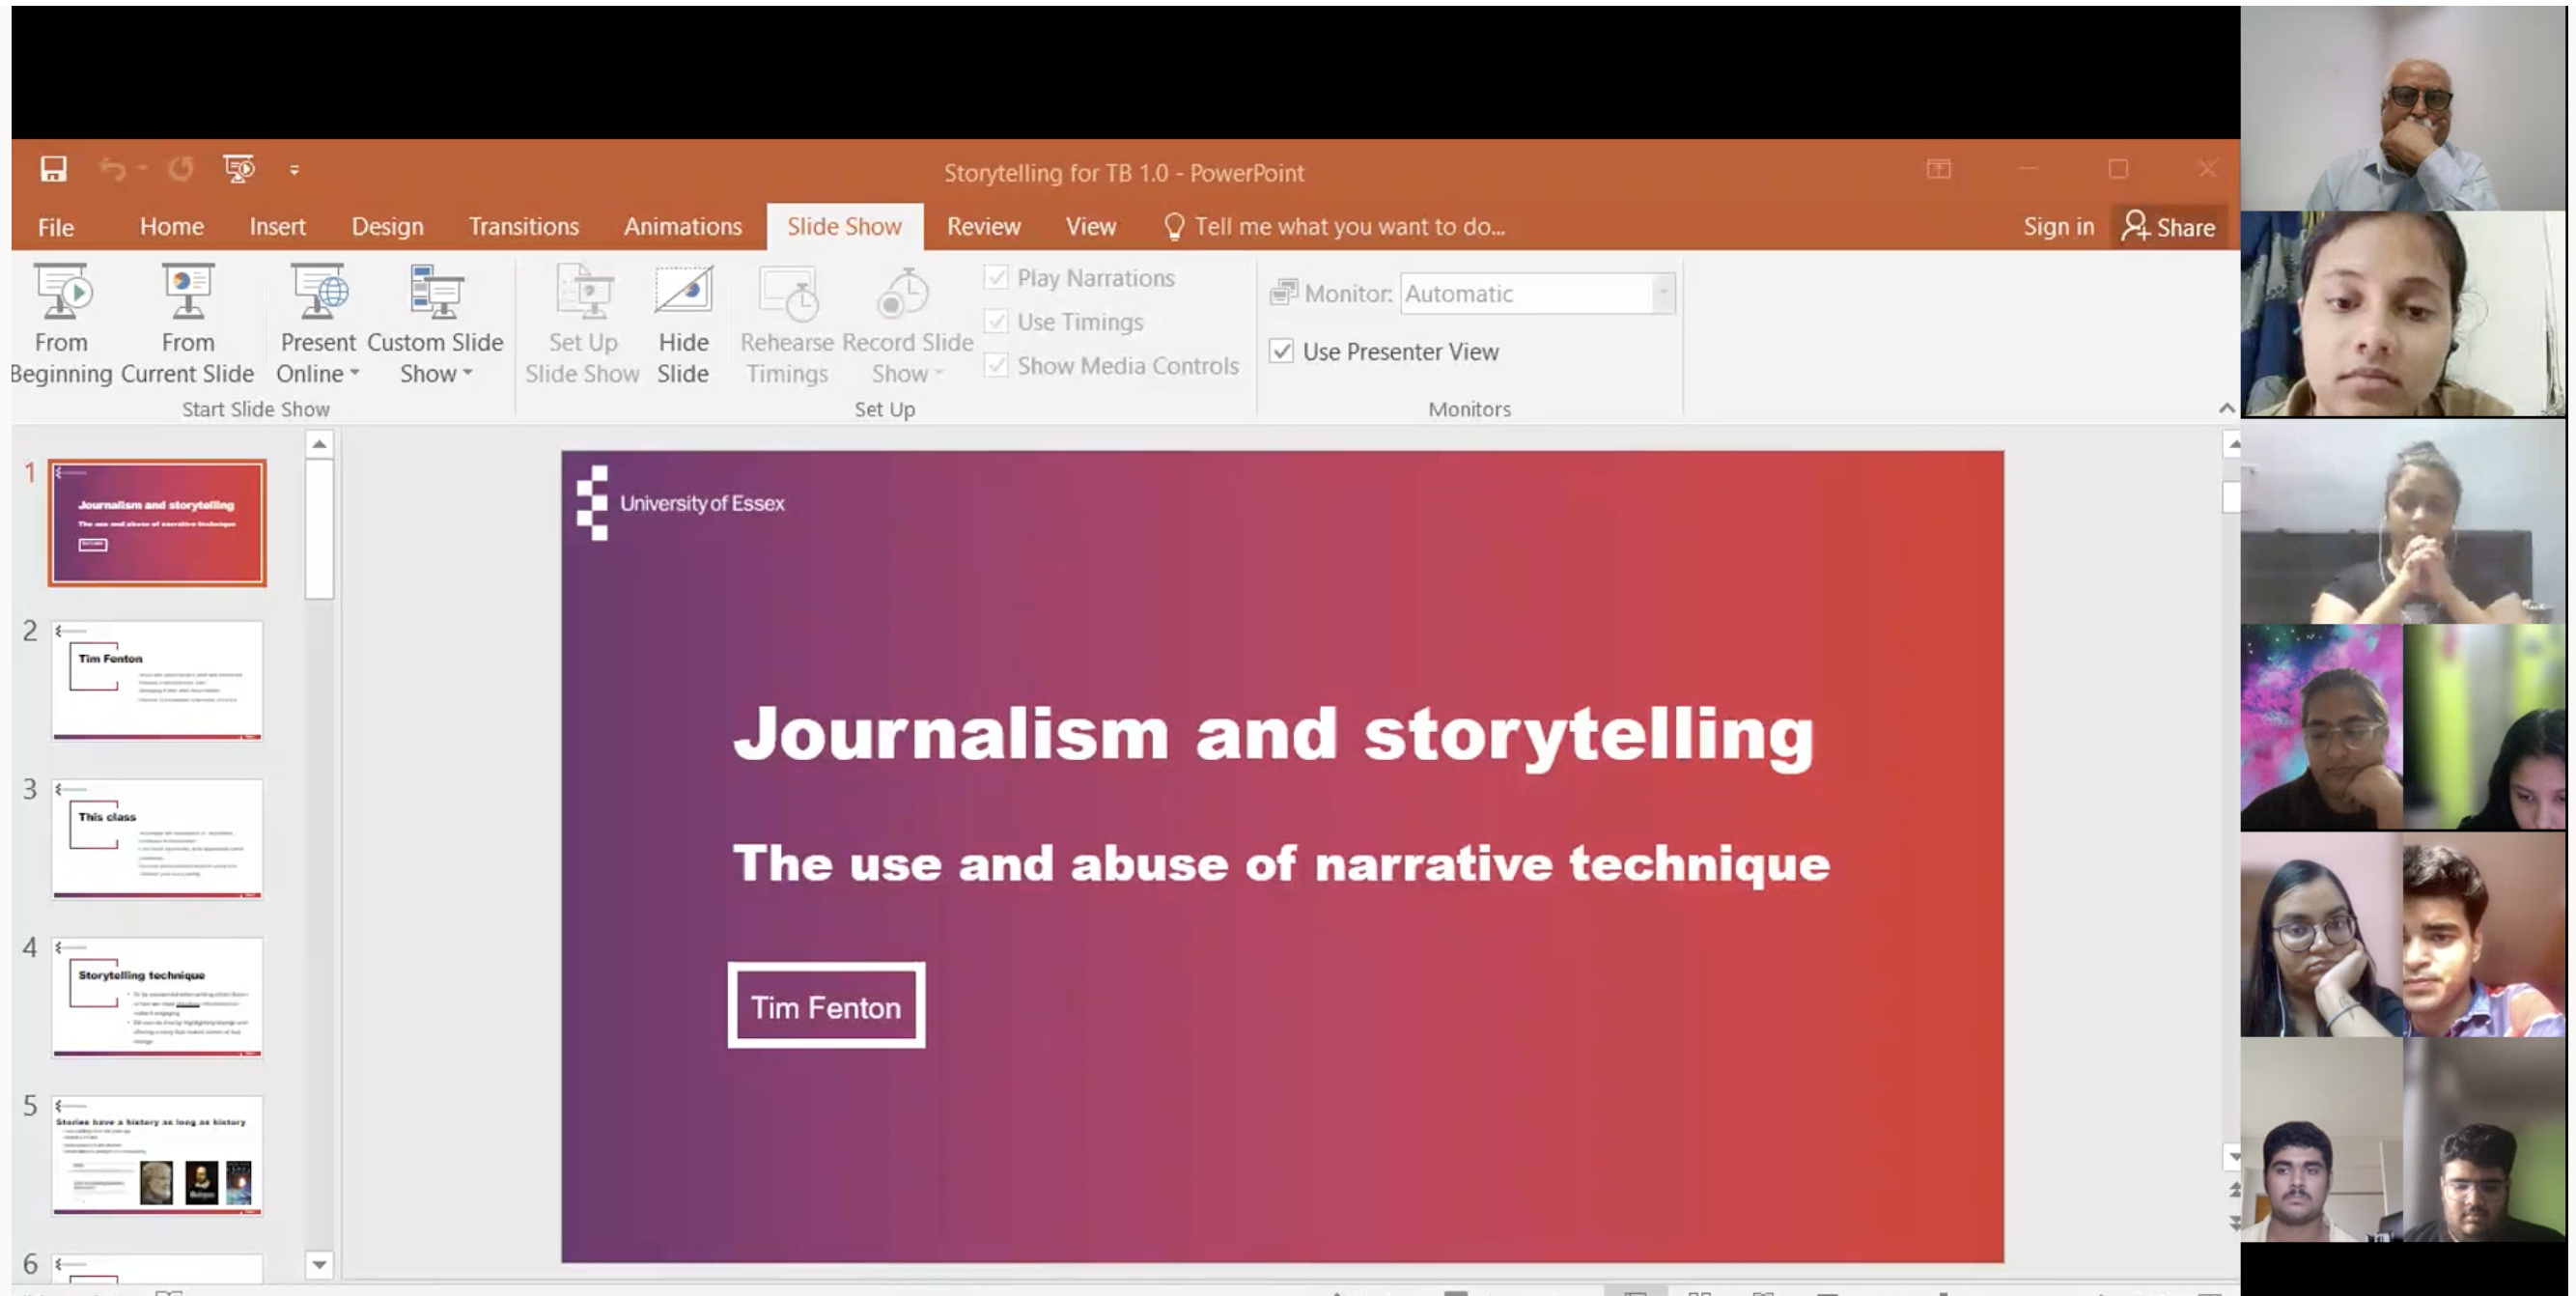 Journalism and storytelling